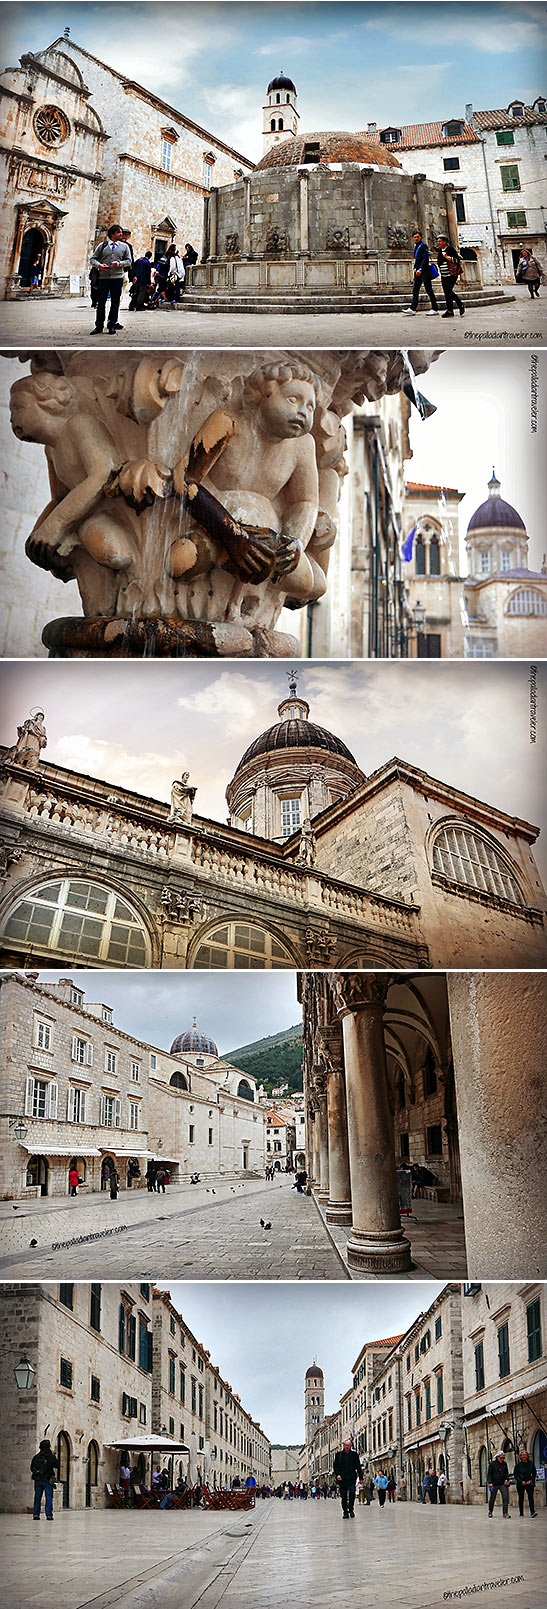 buildings showcasing Renaissance and Baroque architecture in Dubrovnik's Grad (Old City)